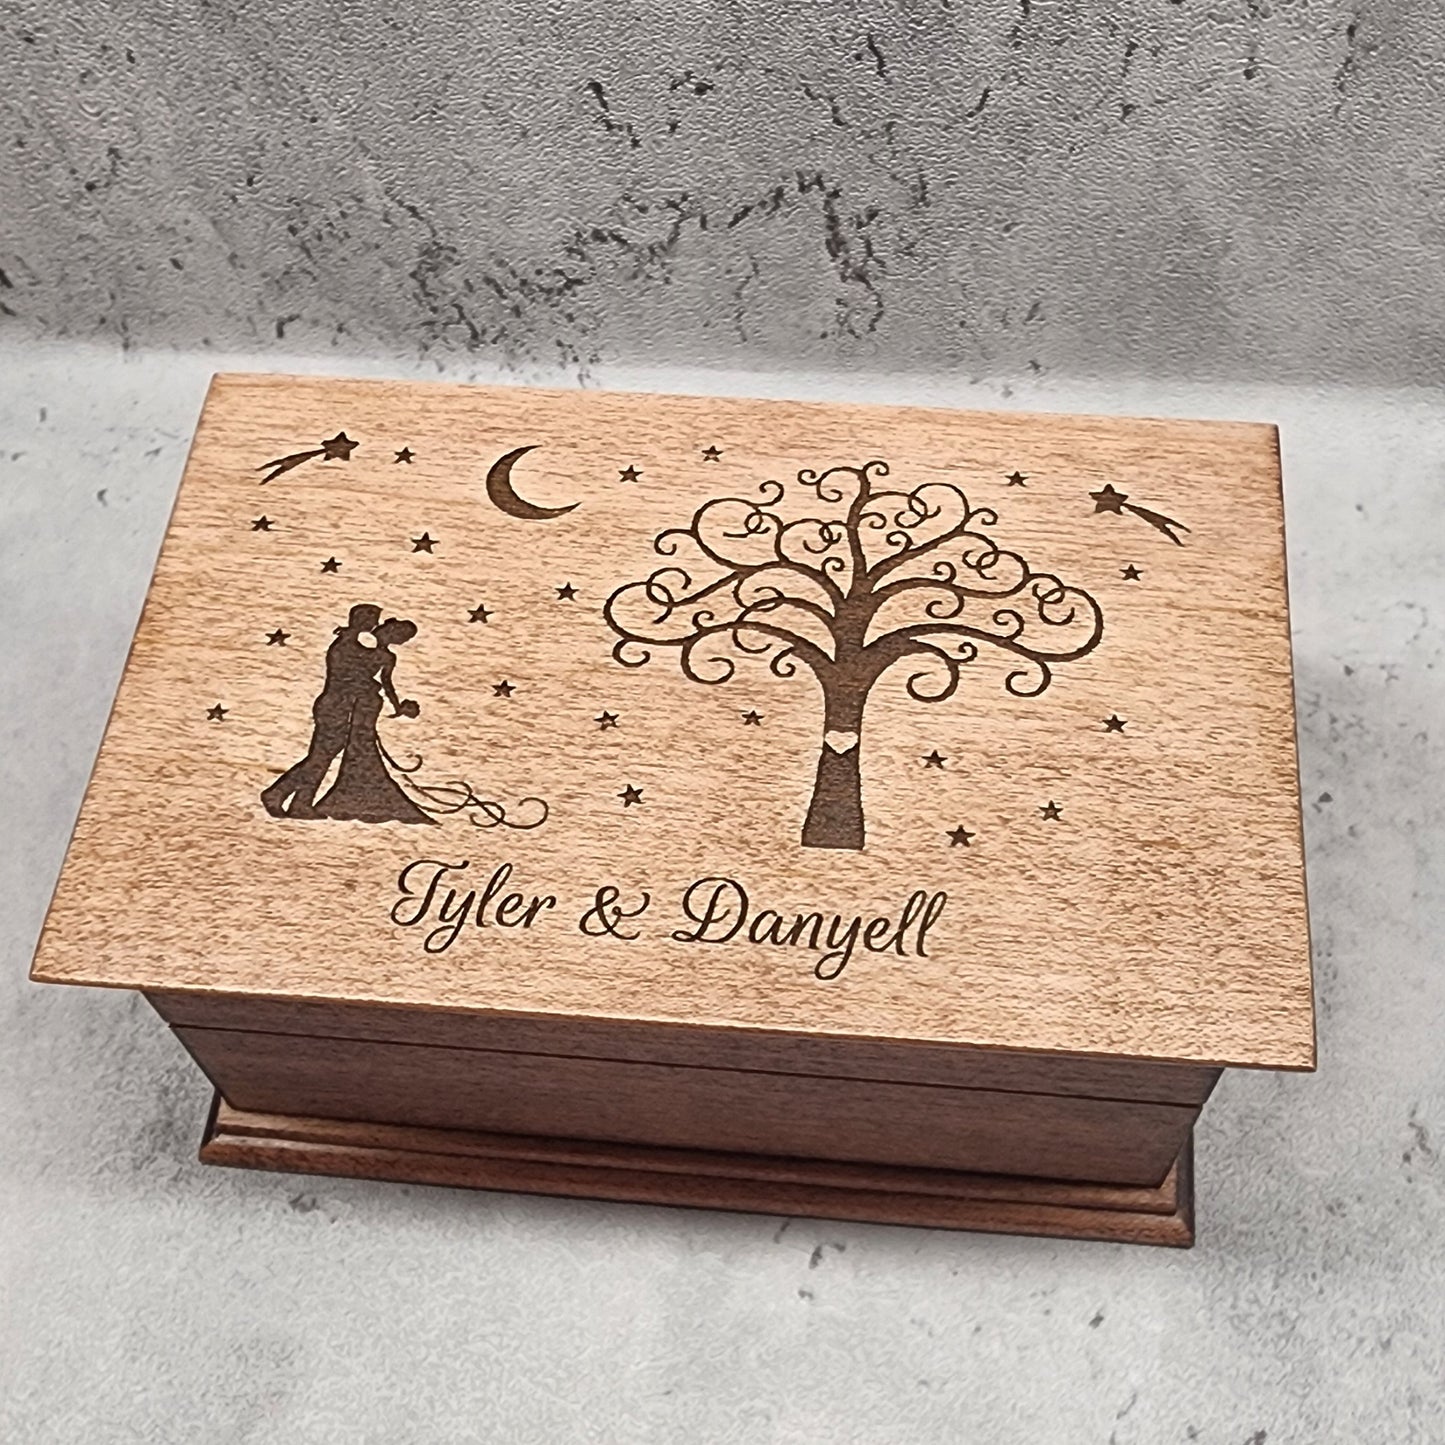 Wedding Jewelry Box with names engraved on top, choose color and song